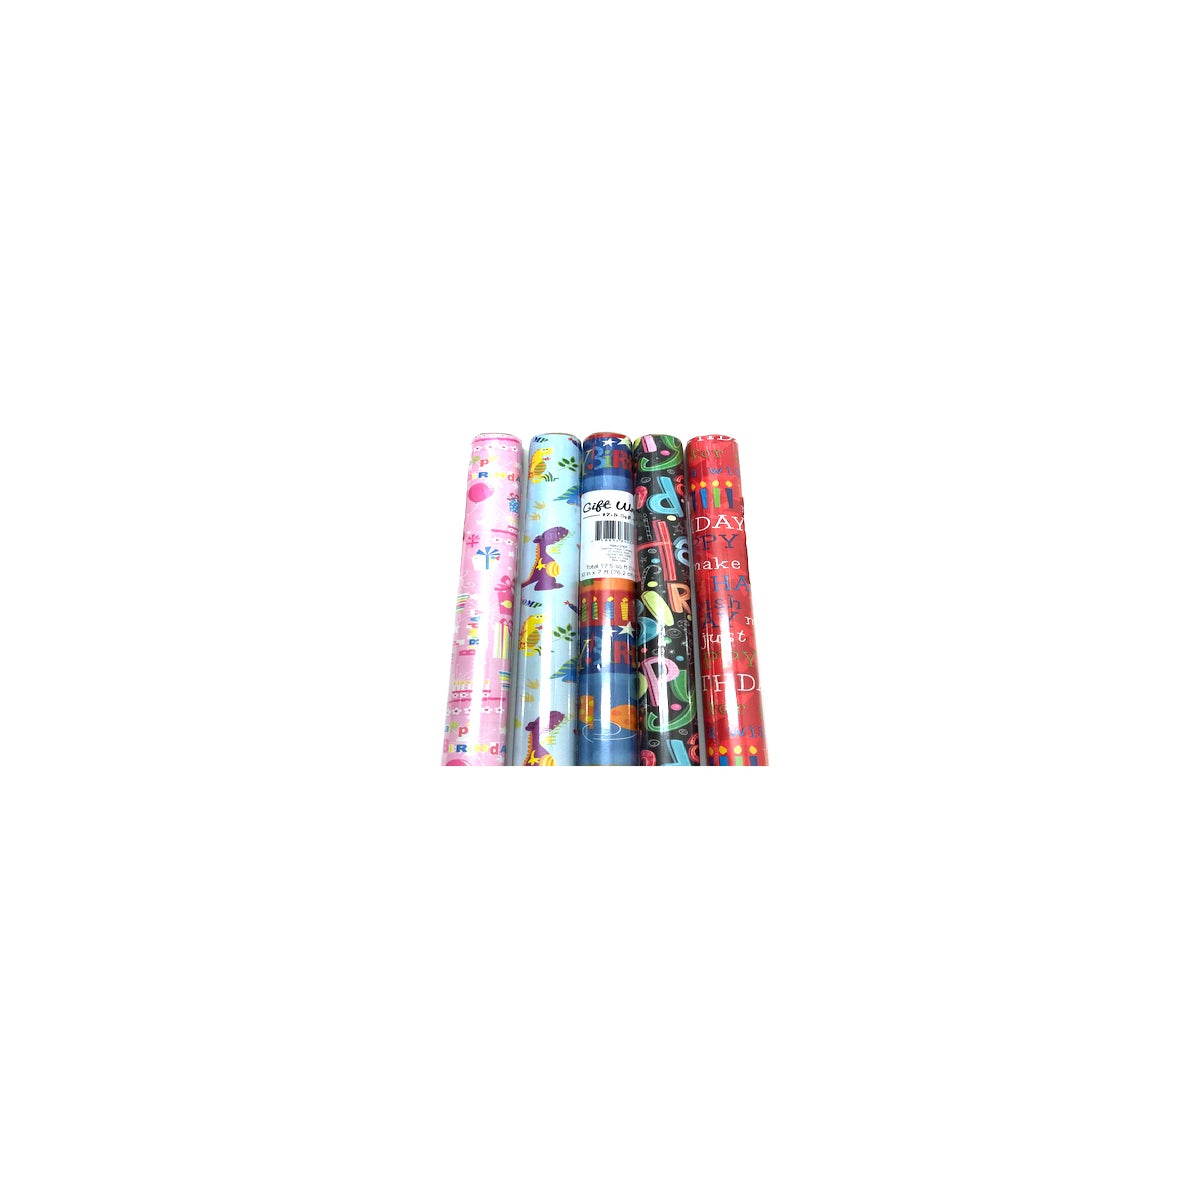 WRAPPING PAPER: BIRTHDAY, 17.5 SQ FT., 30x7 FT. #38257 (PK 48) - party  supplies (ps)